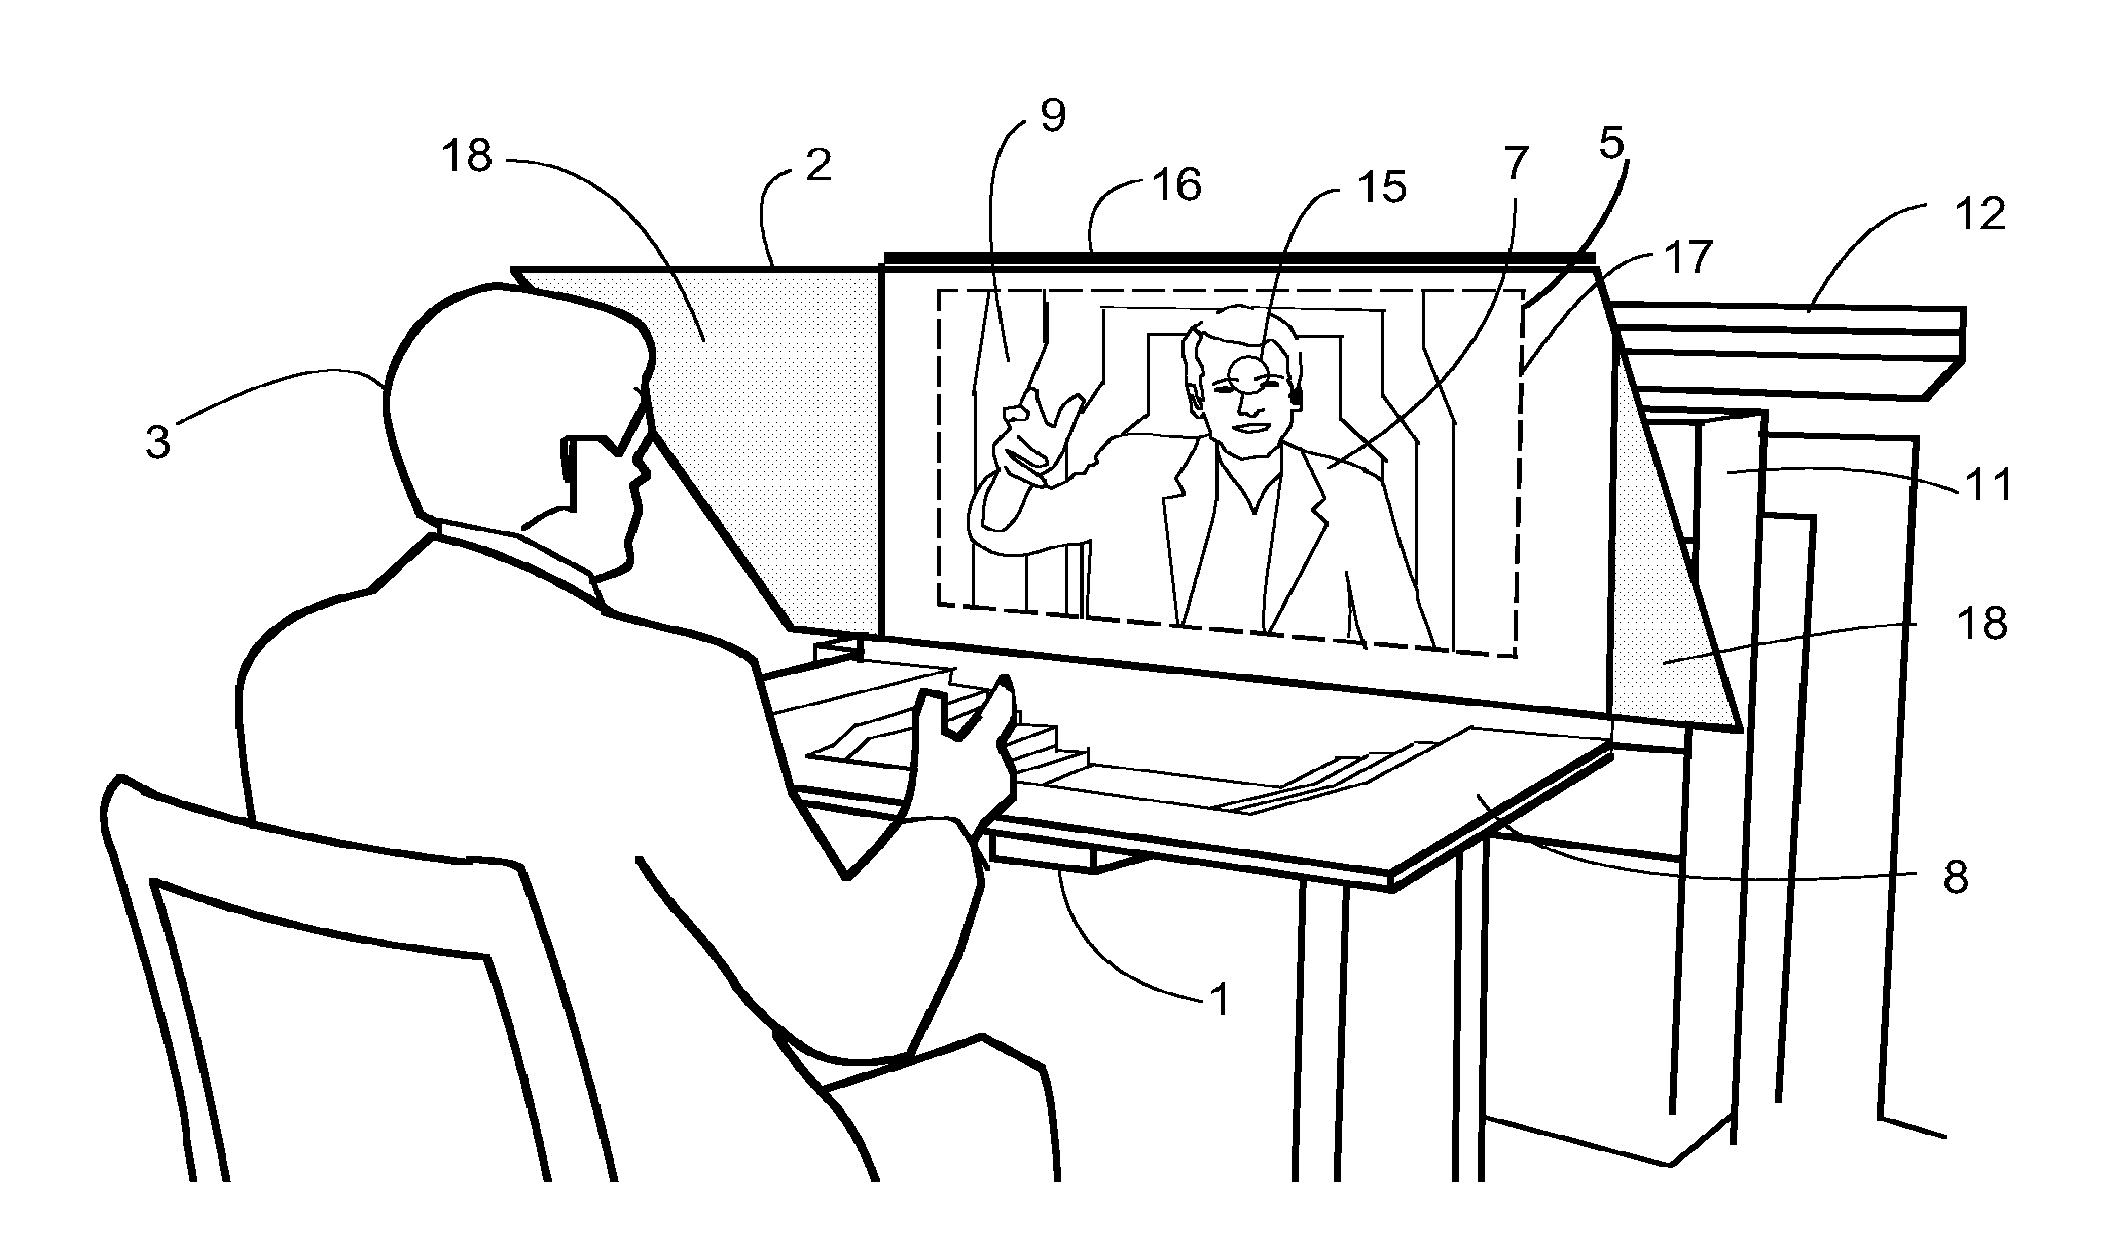 3-D Displays and Telepresence Systems and Methods Therefore